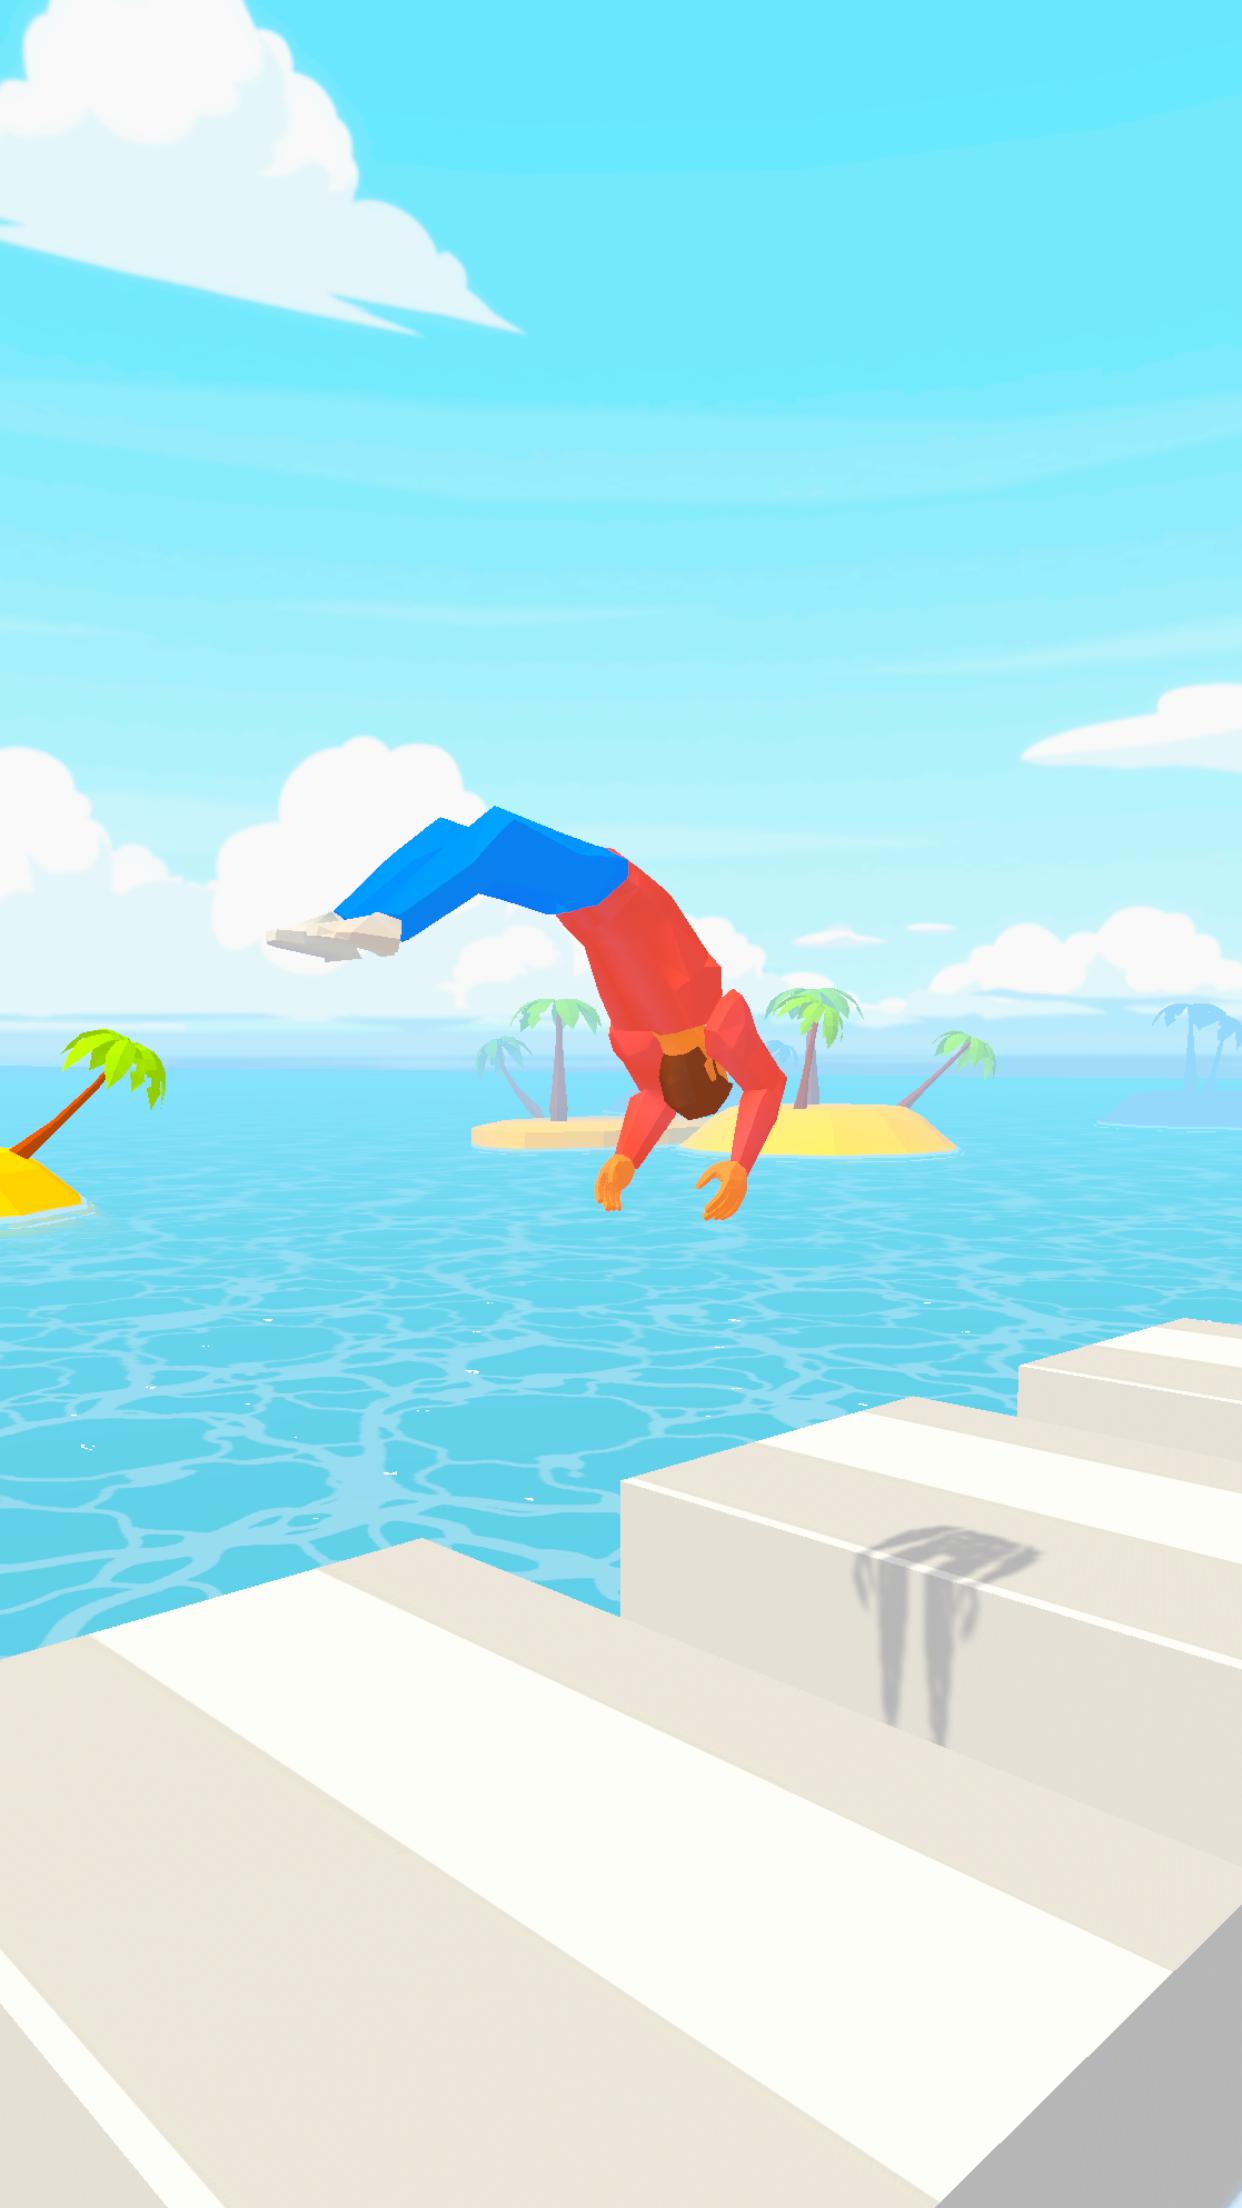 Backflip Pro – Parkour Sports Hypercasual Game Source Code